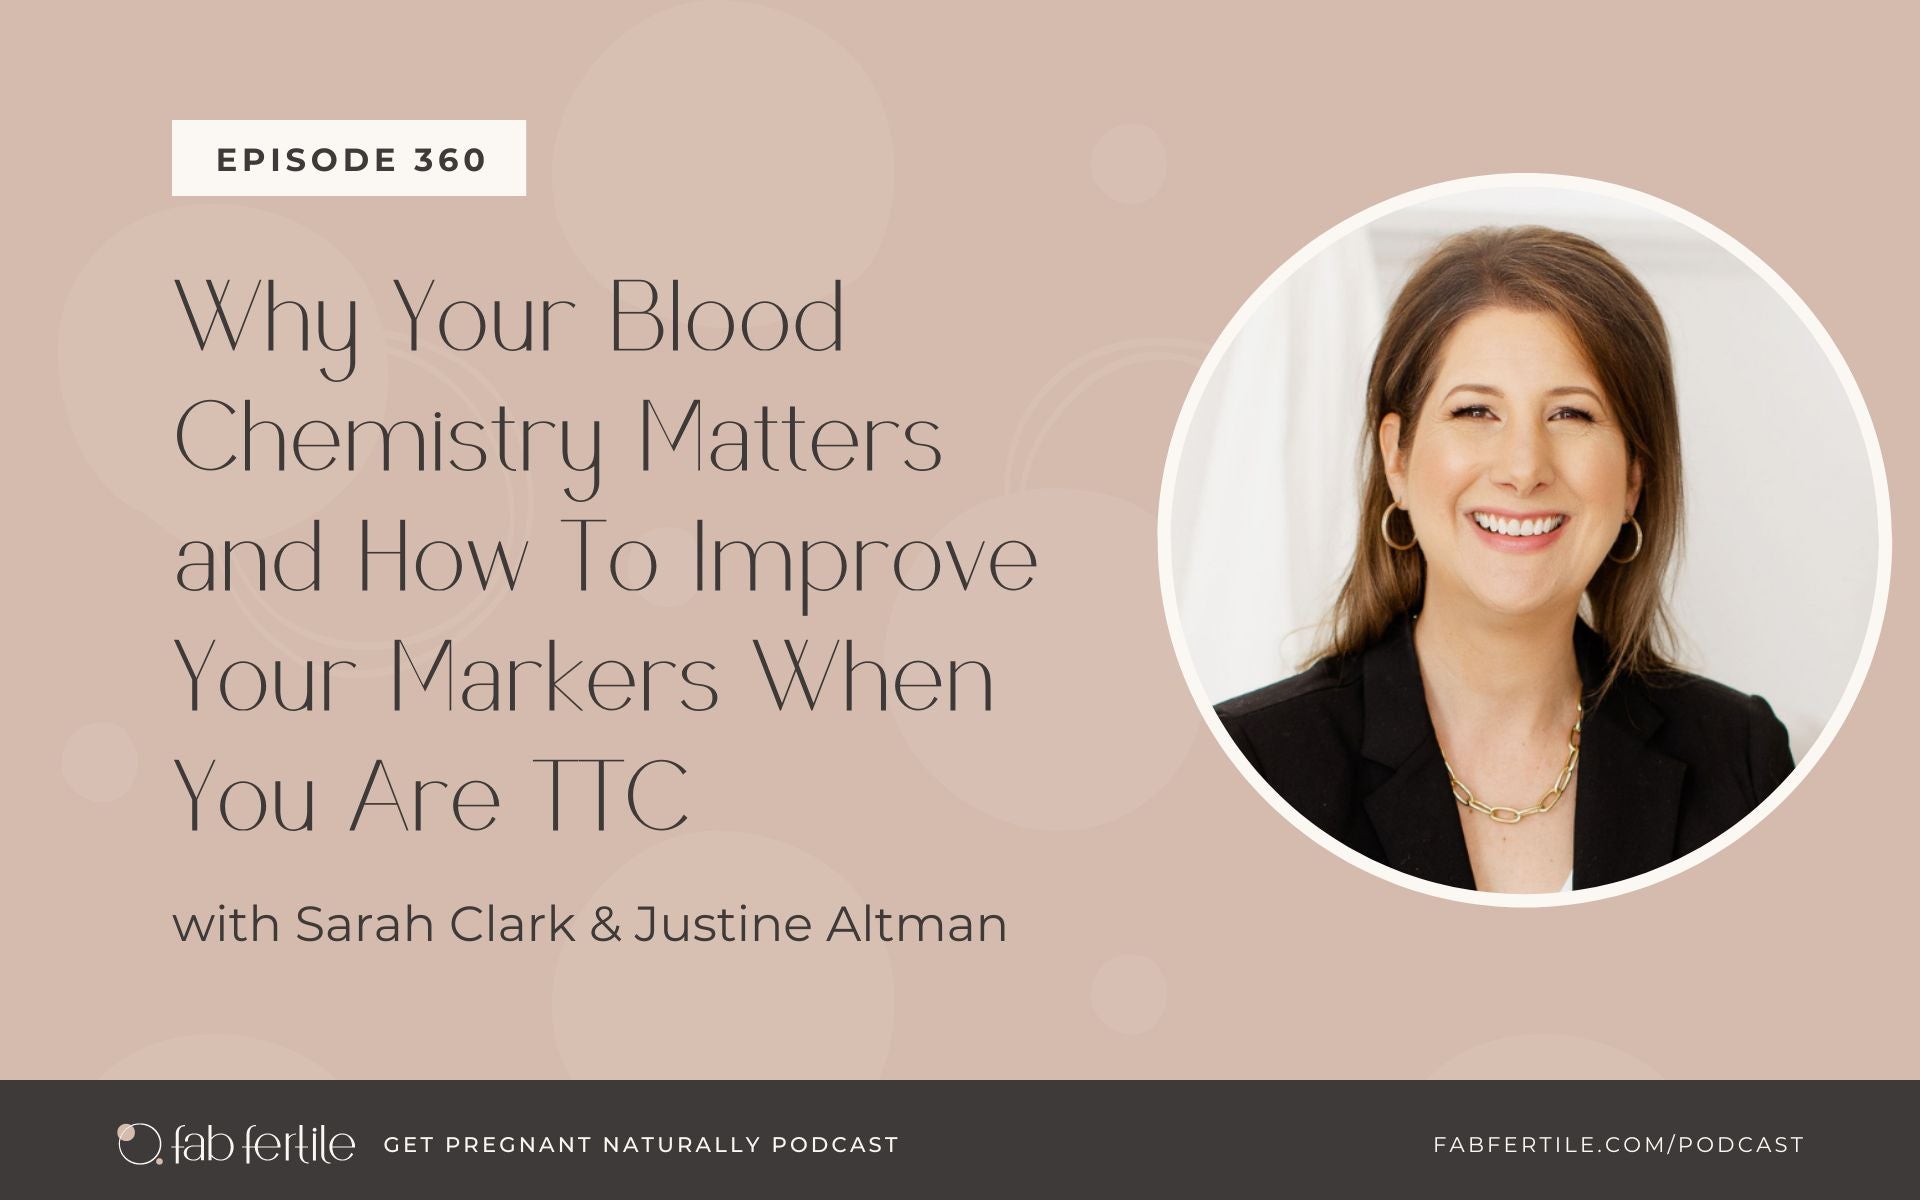 Why Your Blood Chemistry Matters and How To Improve Your Markers When You Are TTC